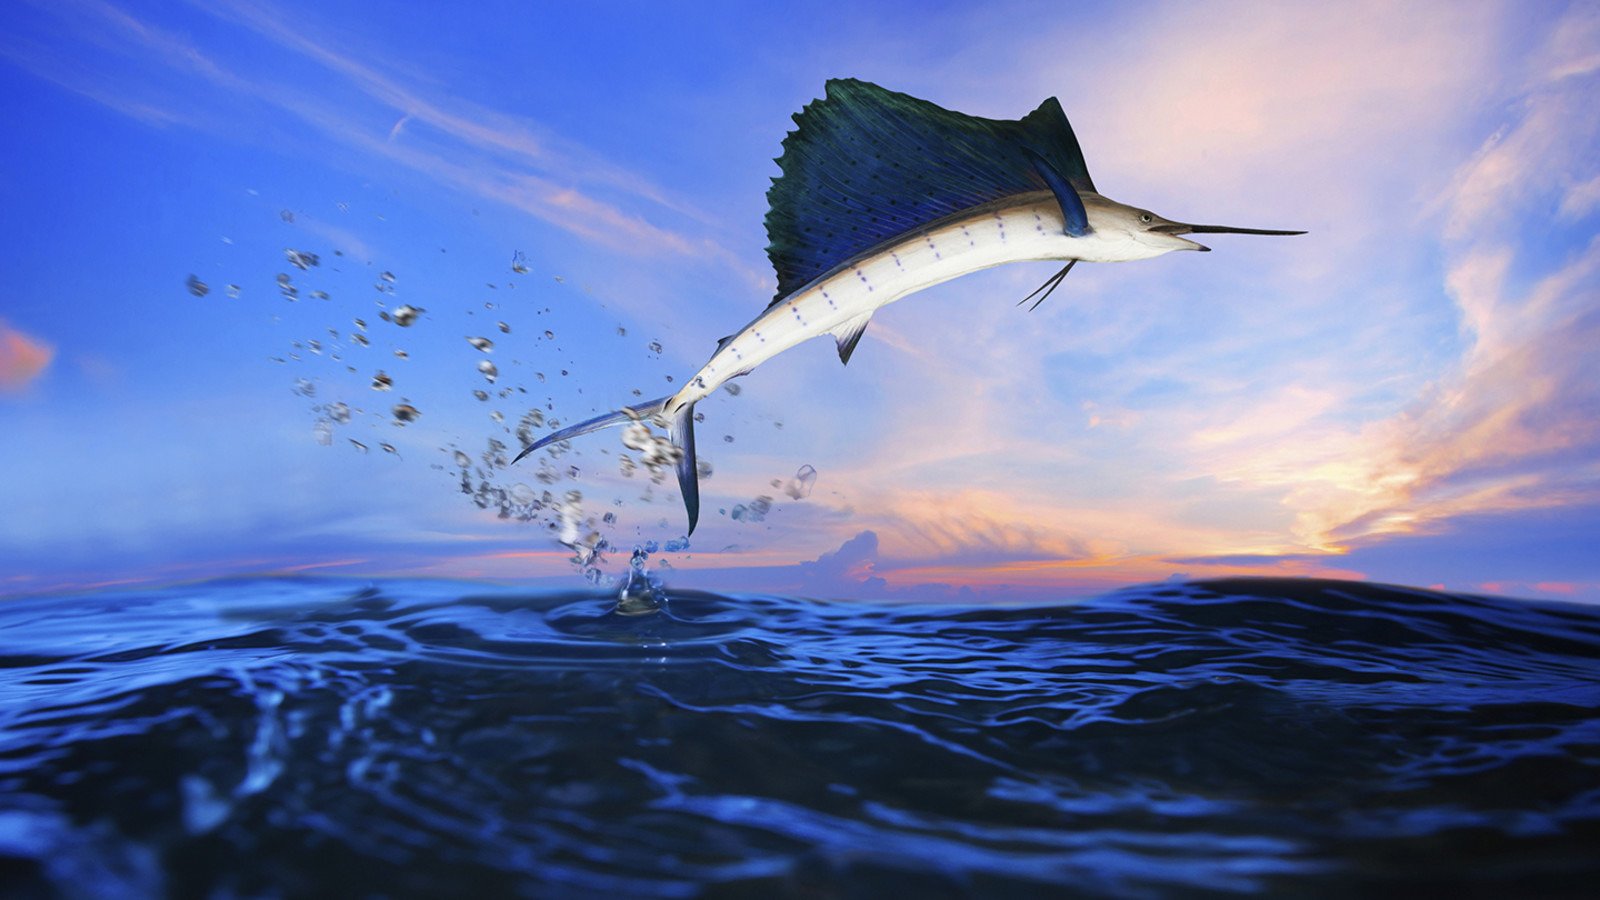 The fastest fish is the sailfish.